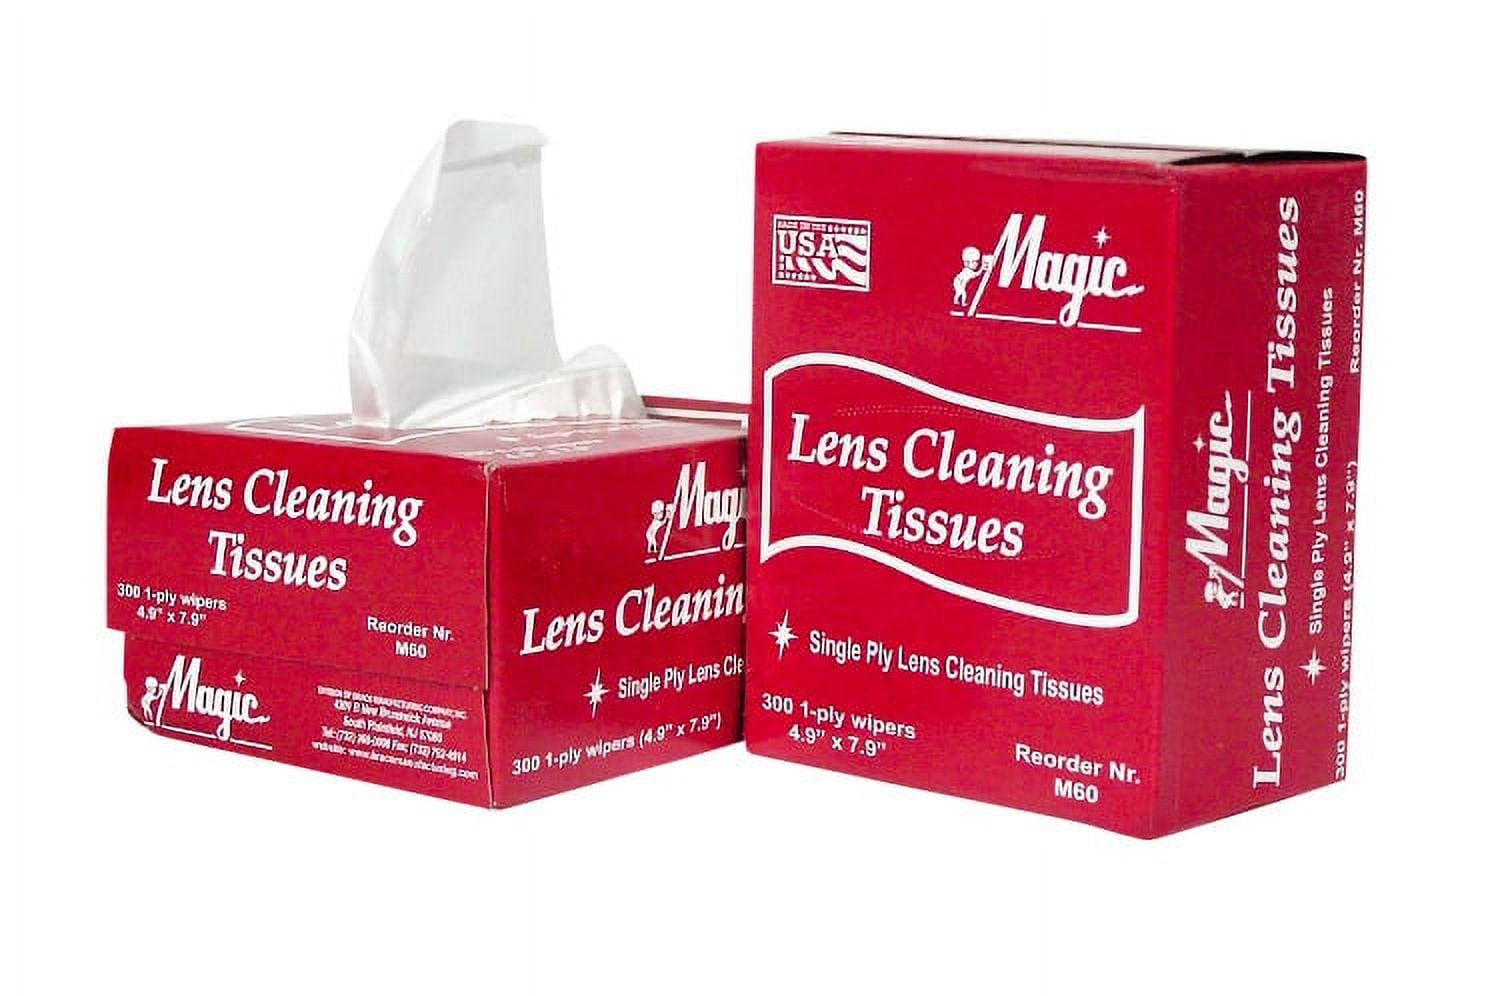 Magic New Lens Cleaning Tissues, All Purpose Wipers 1 Box (300